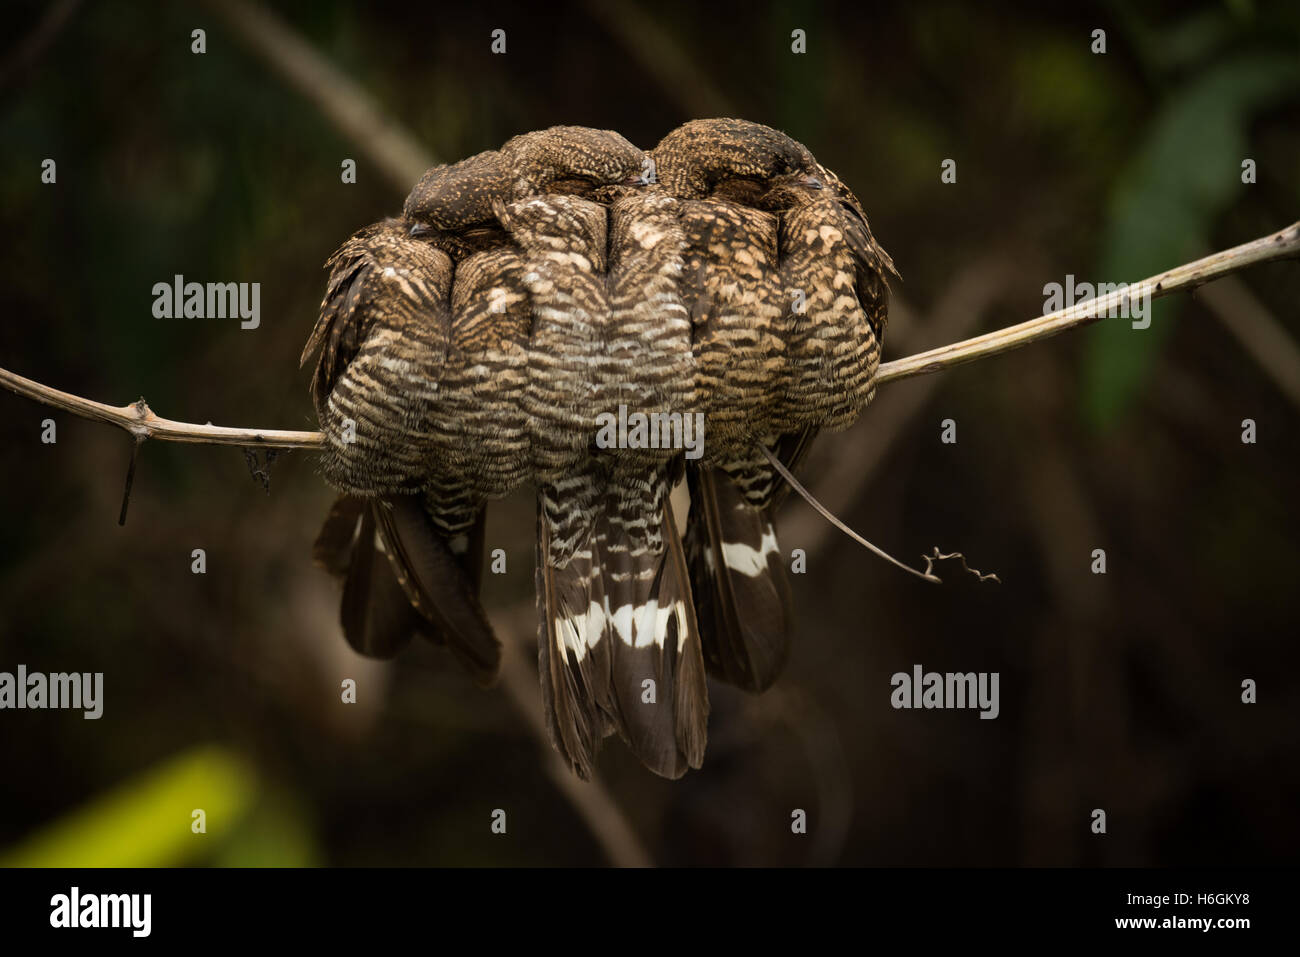 Three band-tailed nightjars squeezed together on branch Stock Photo